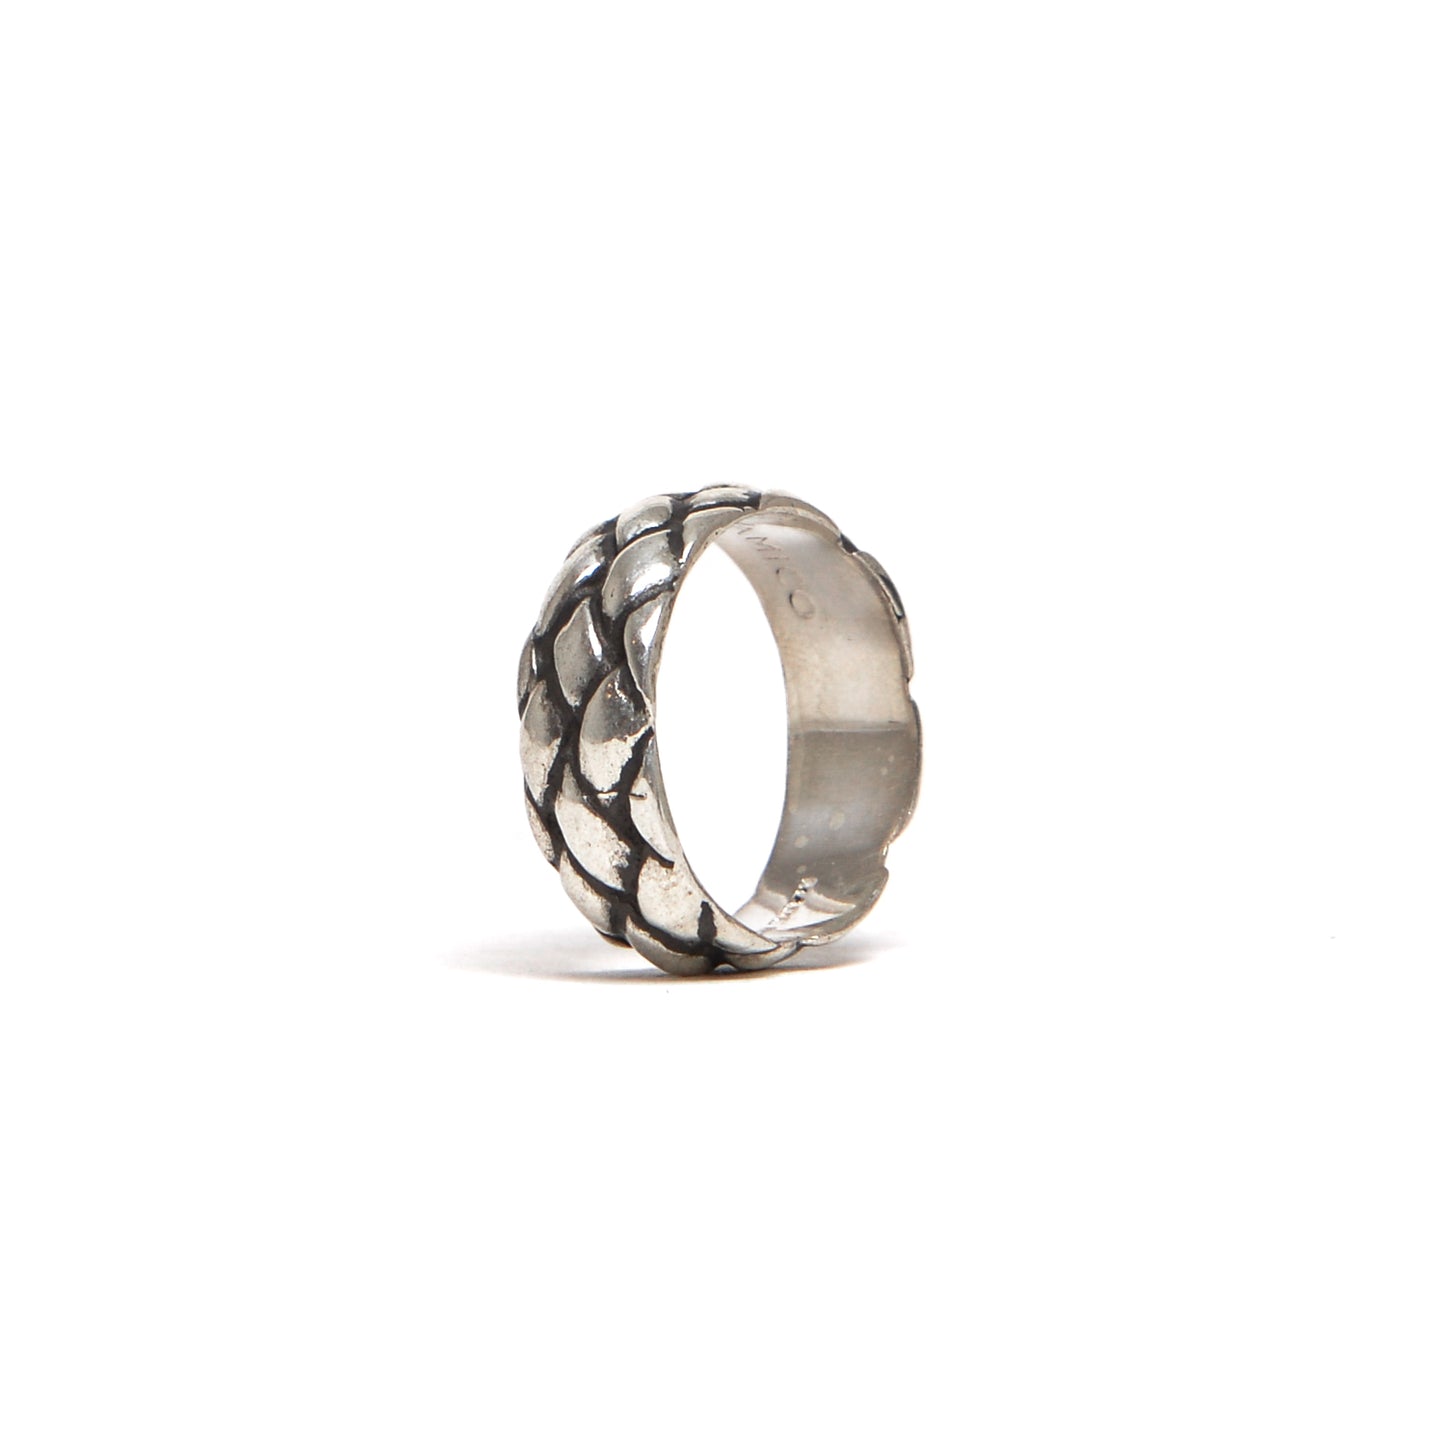 Intertwined Faith Ring